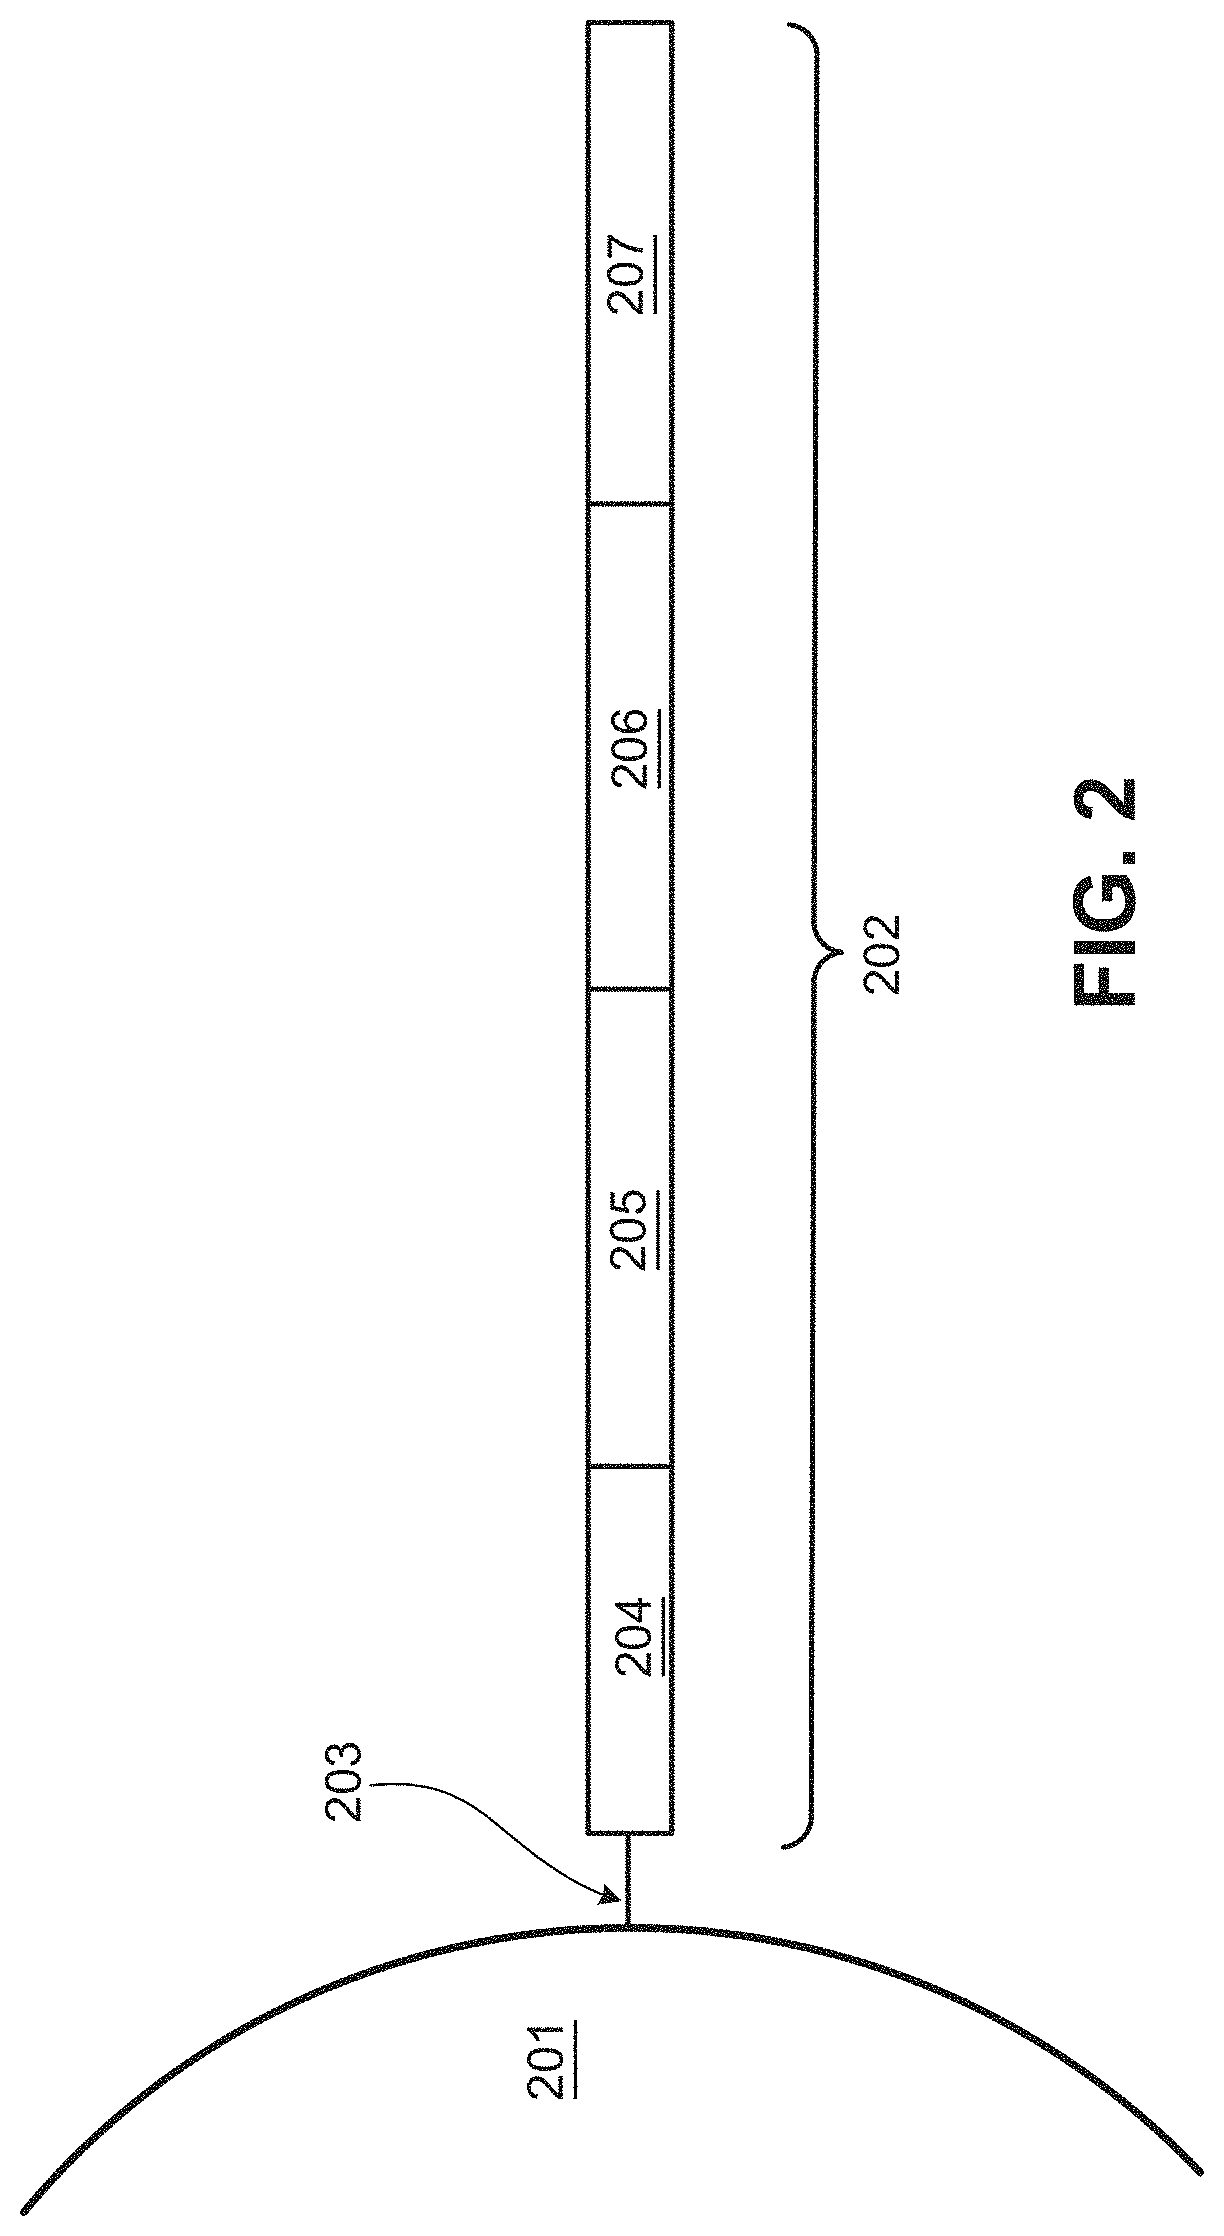 Methods for spatial analysis using rna-templated ligation